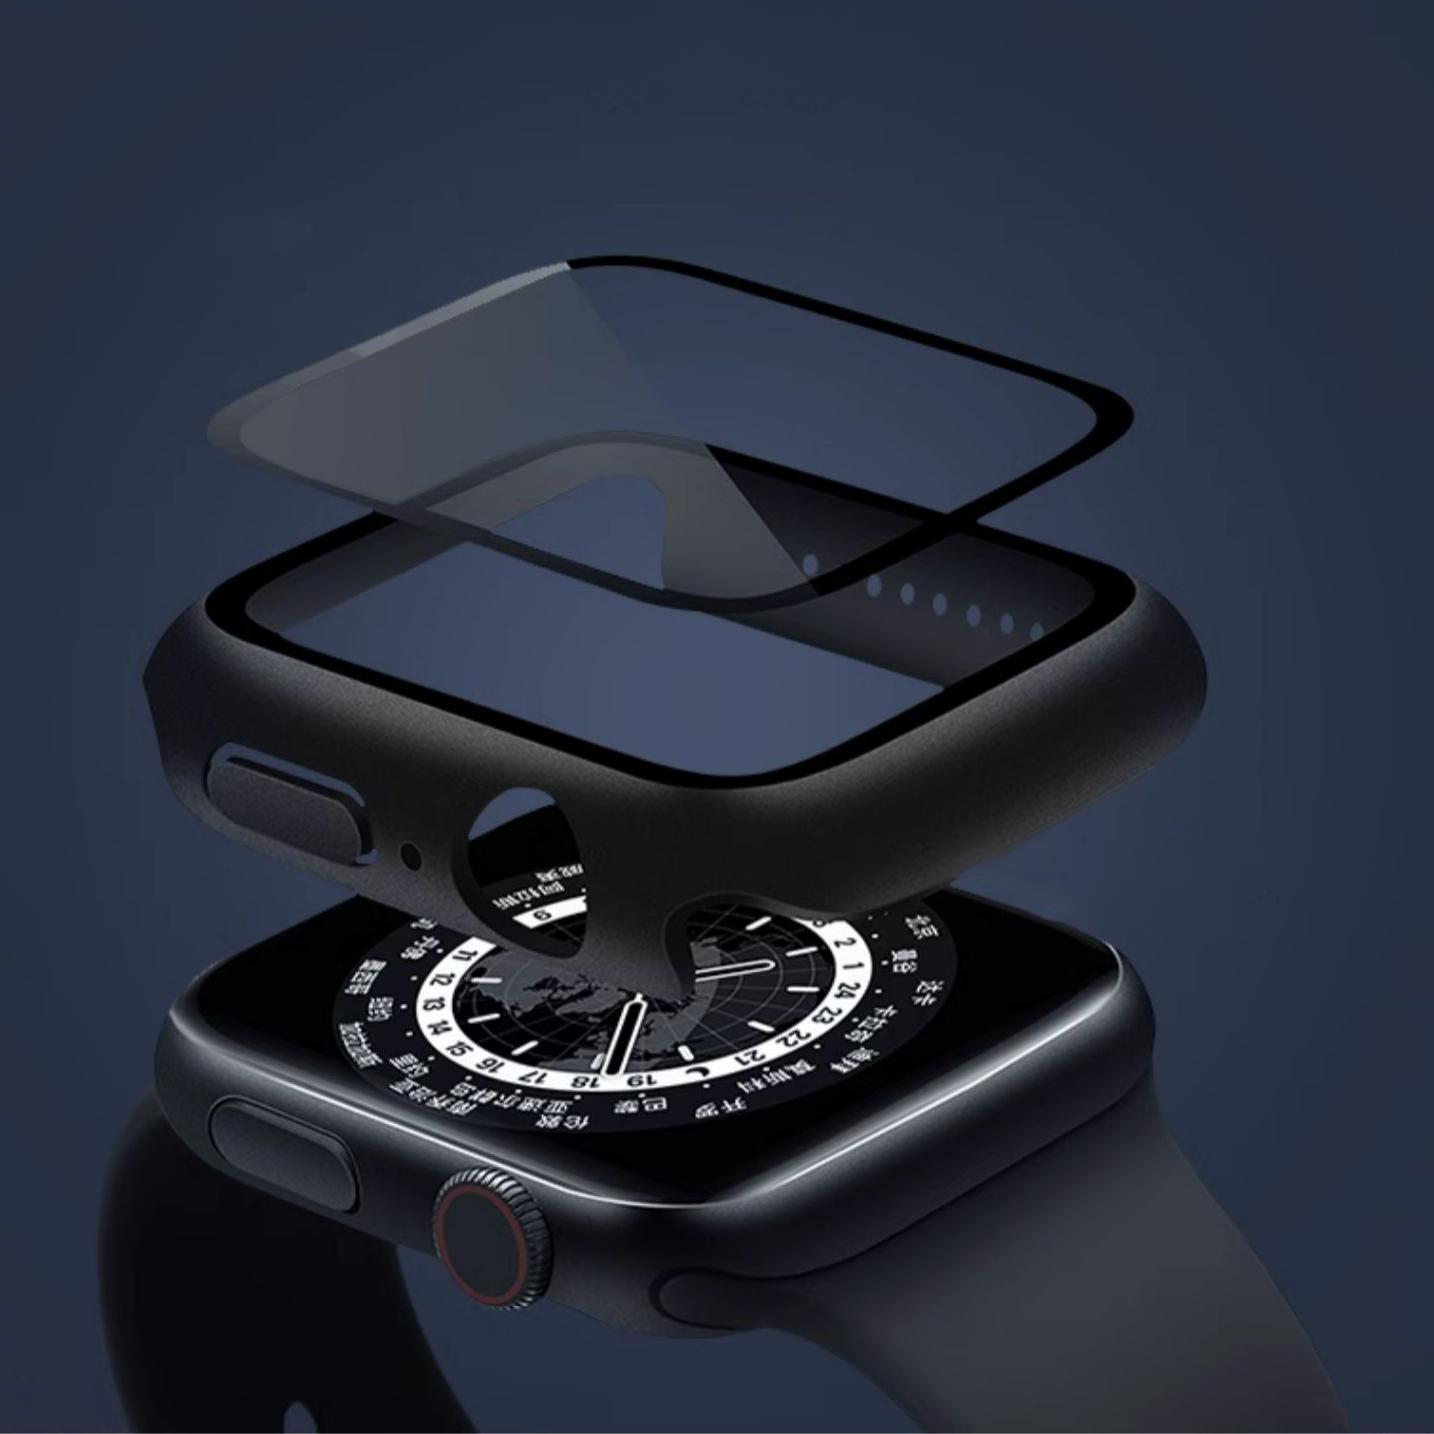 iWatch Case with Tempered Glass Screen Protector and Drop Protection